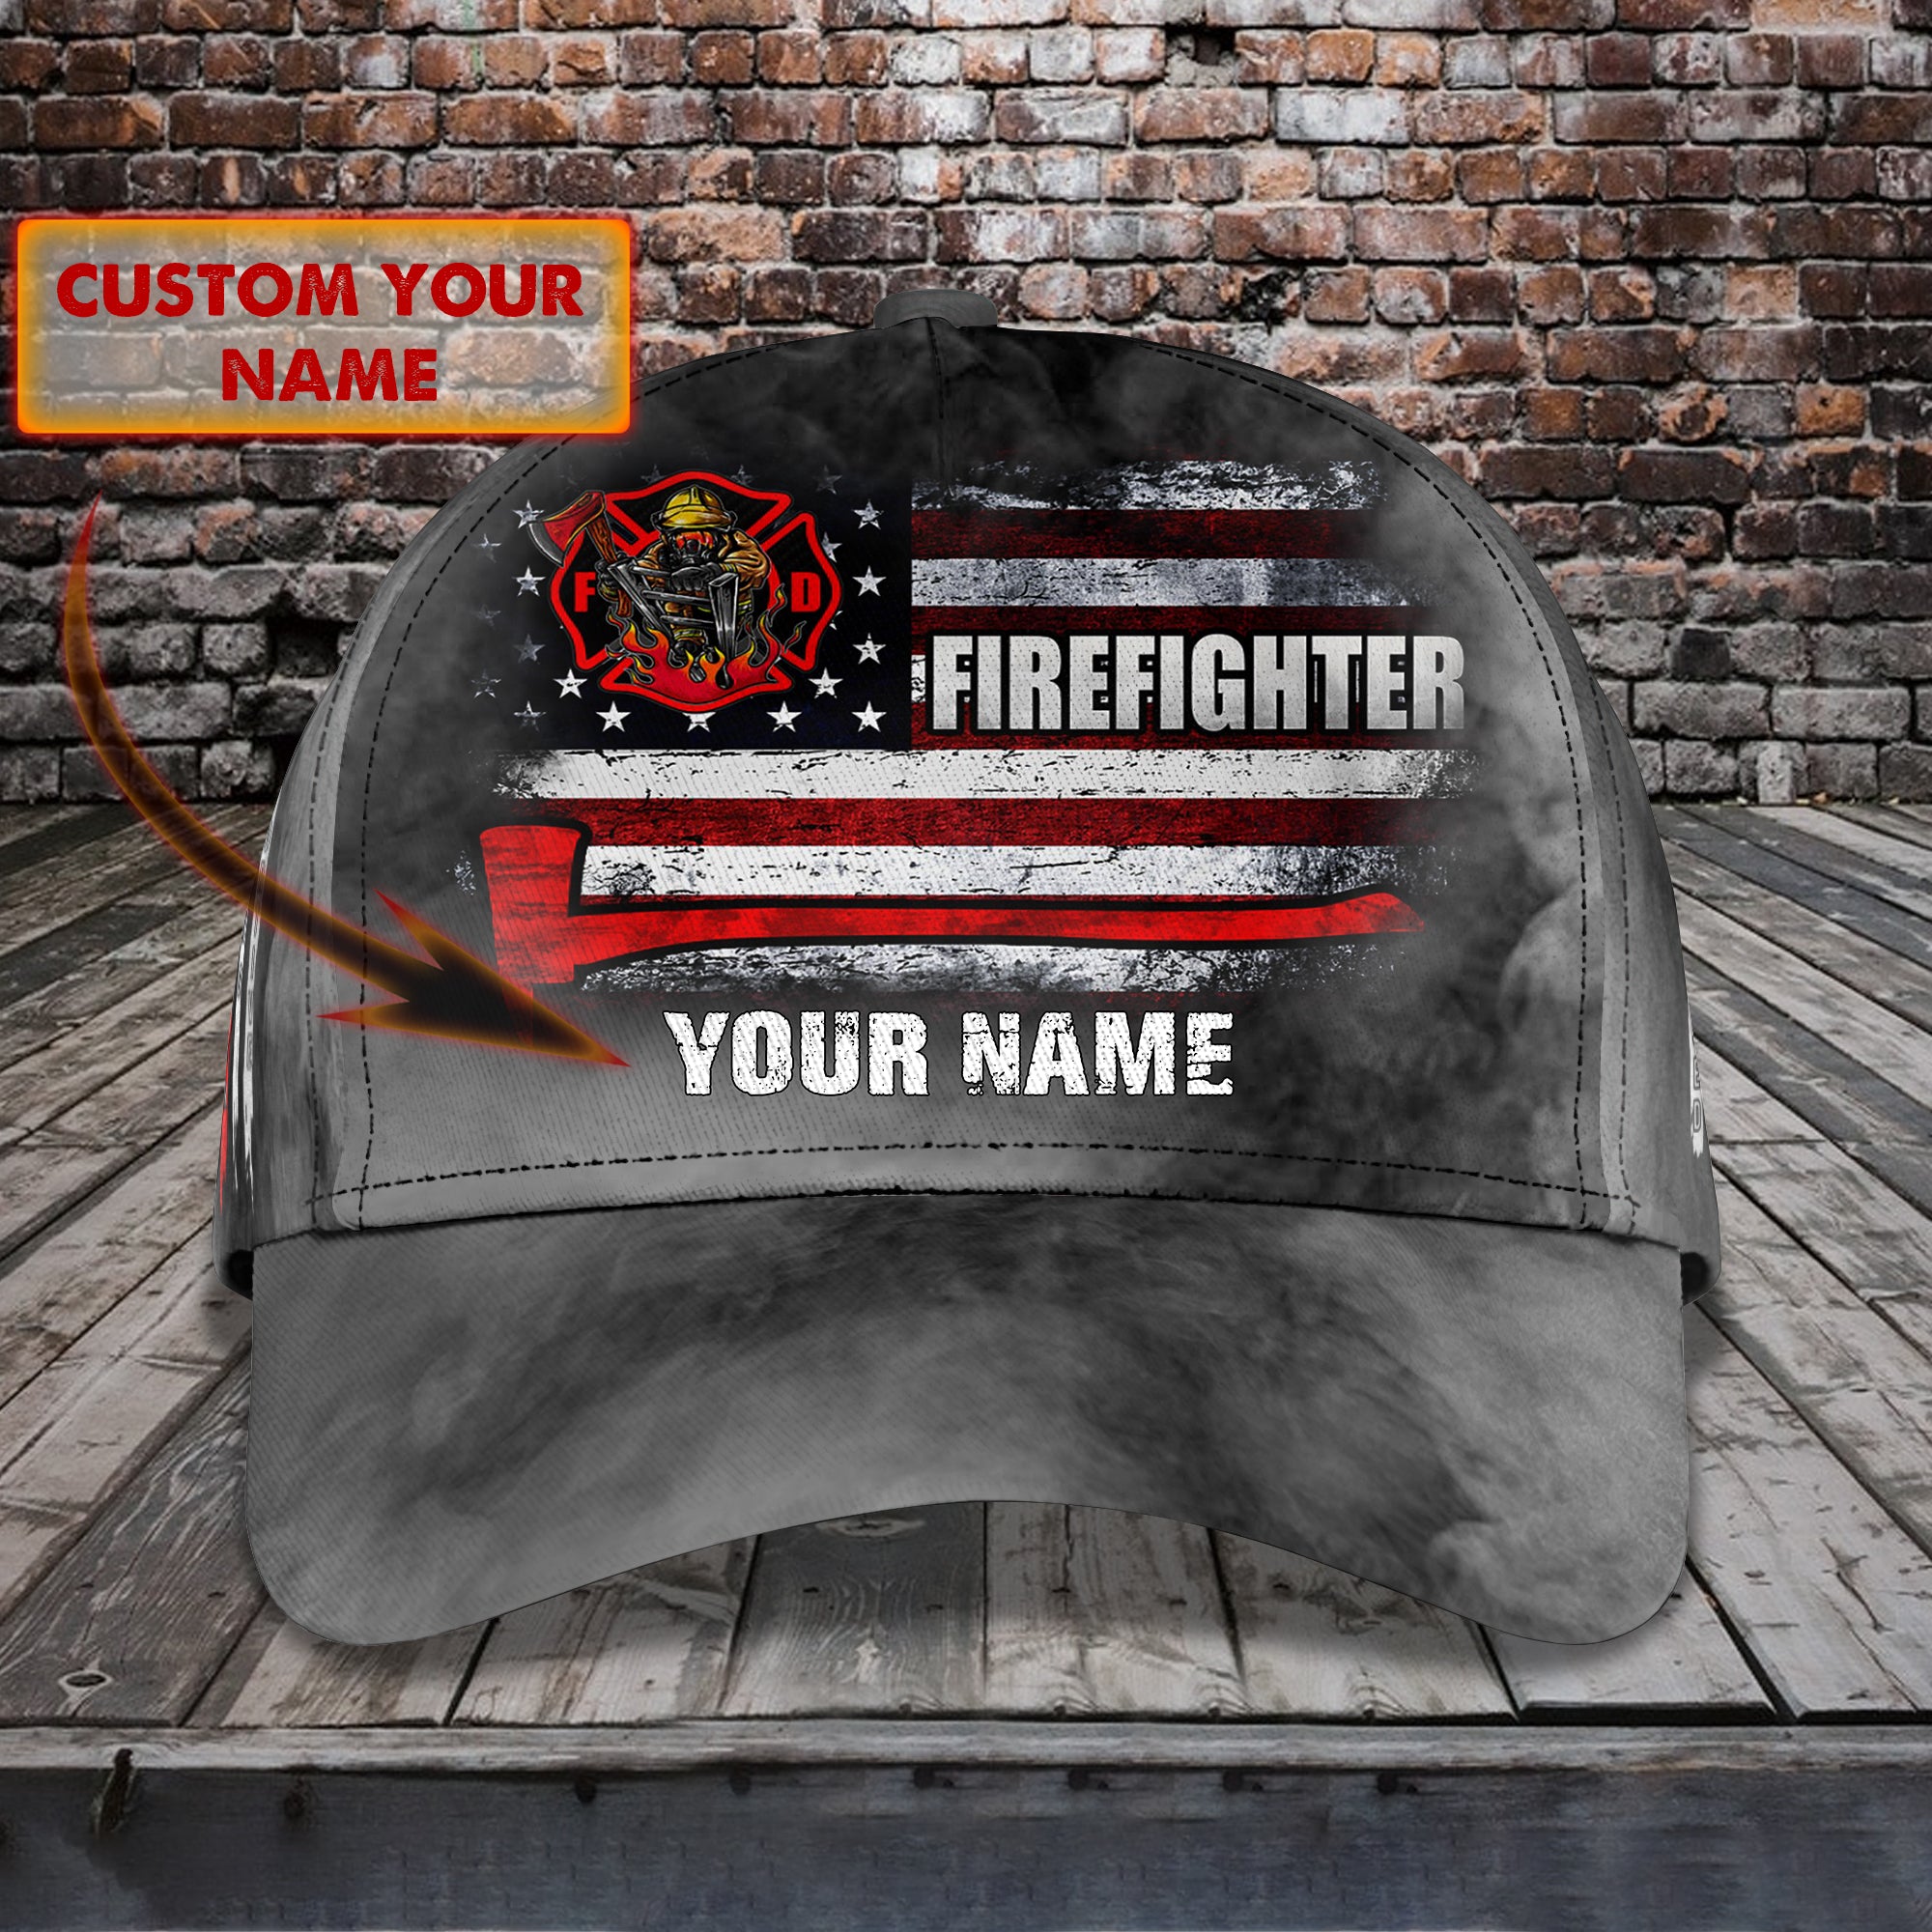 Firefighter C21 - Personalized Name Cap - Vtm99